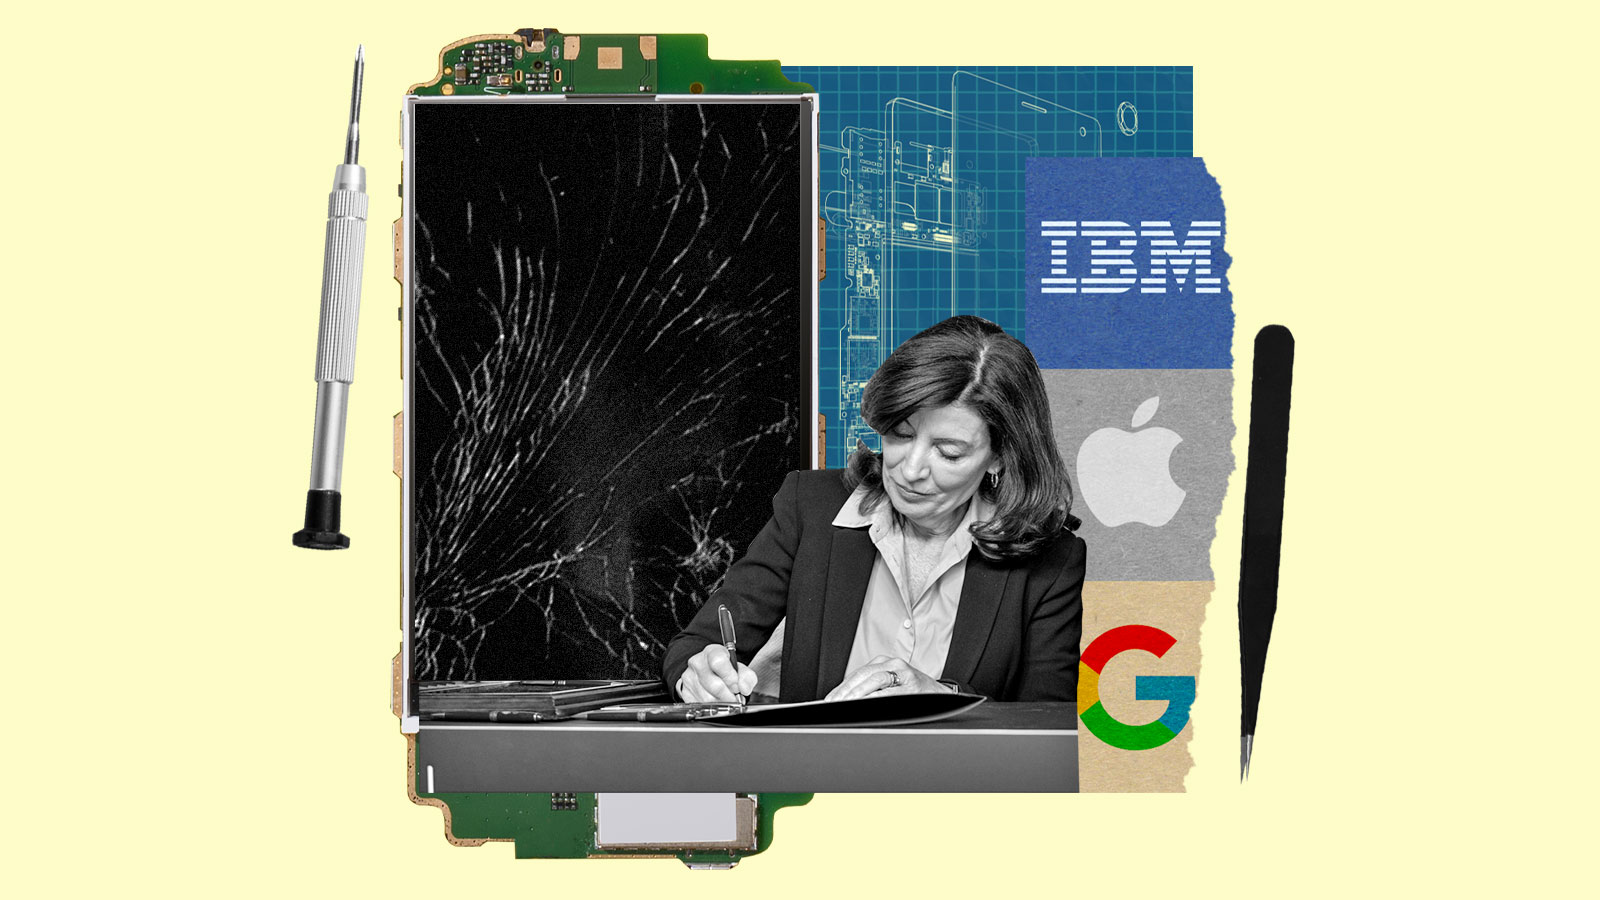 Collage: broken cell phone, screwdriver and tweezers, blueprint of cell phone, IBM, Apple, and Google logos, and Governor Kathy Hochul signing a document